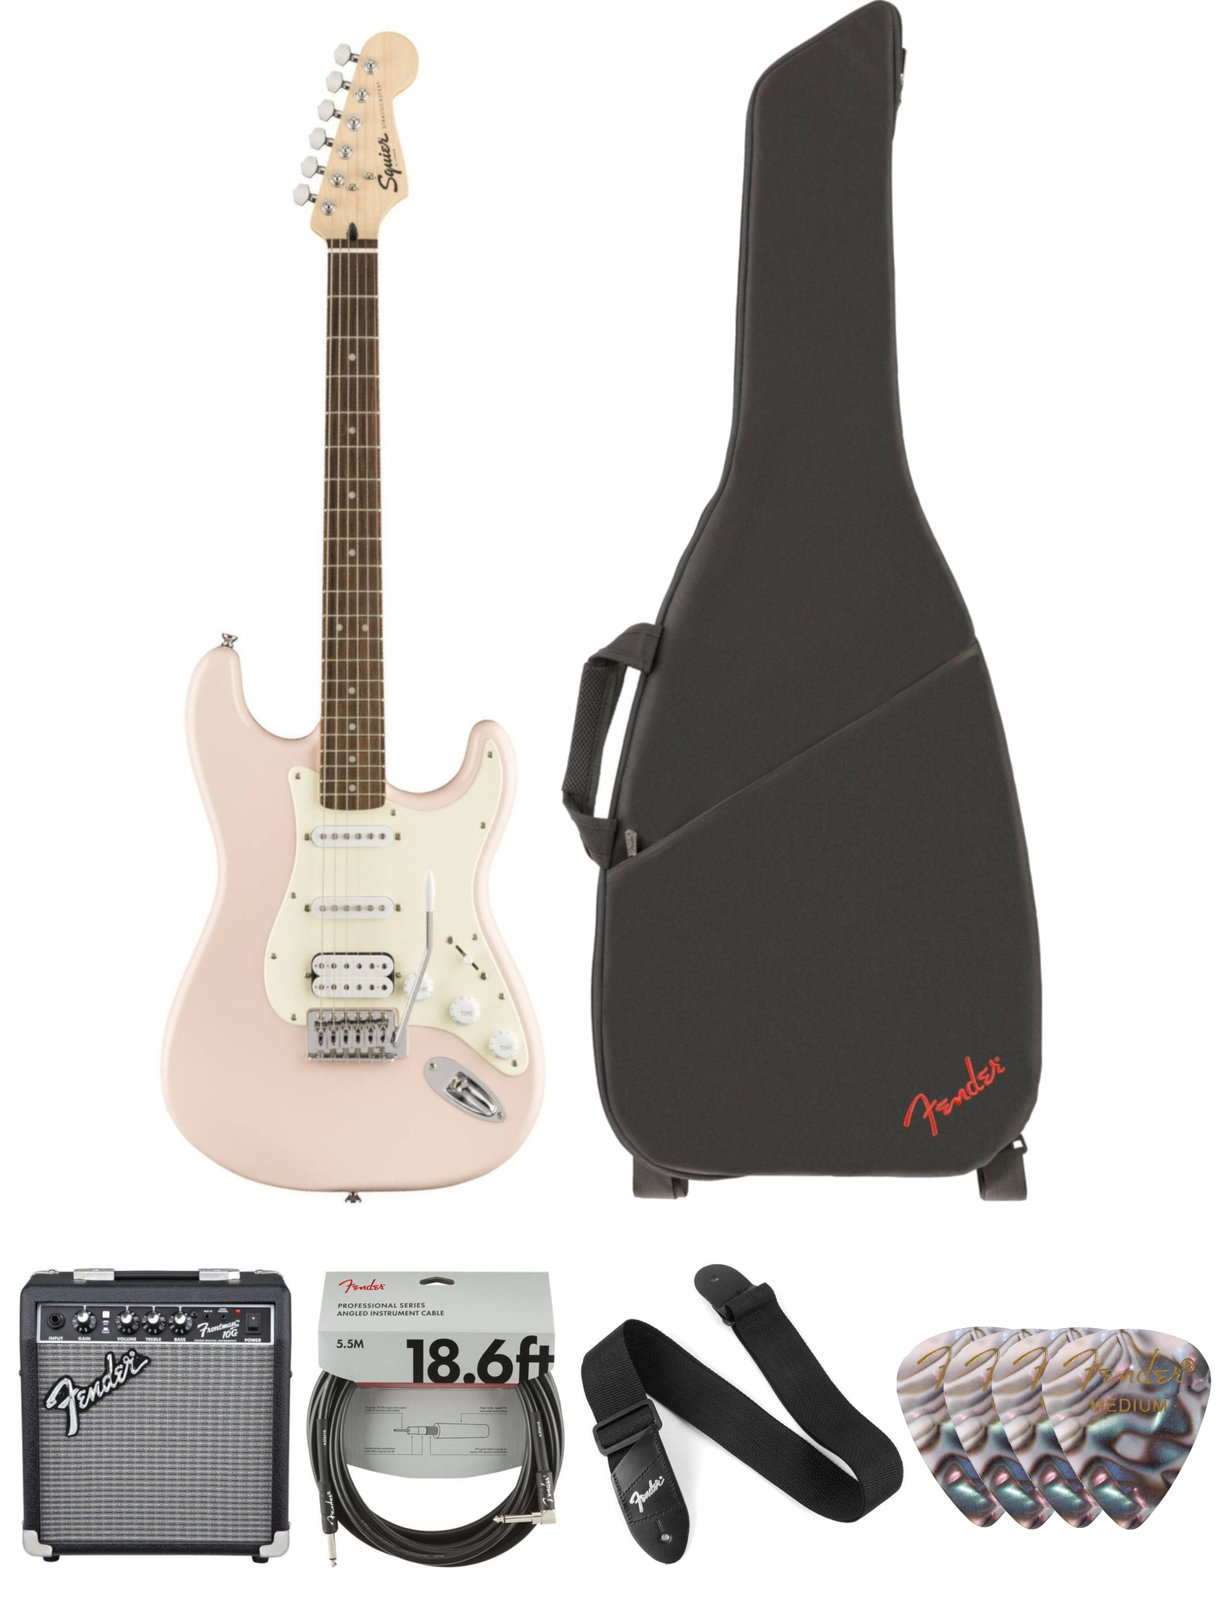 Electric guitar Fender Squier Bullet Stratocaster Tremolo HSS IL Shell Pink Deluxe SET Shell Pink